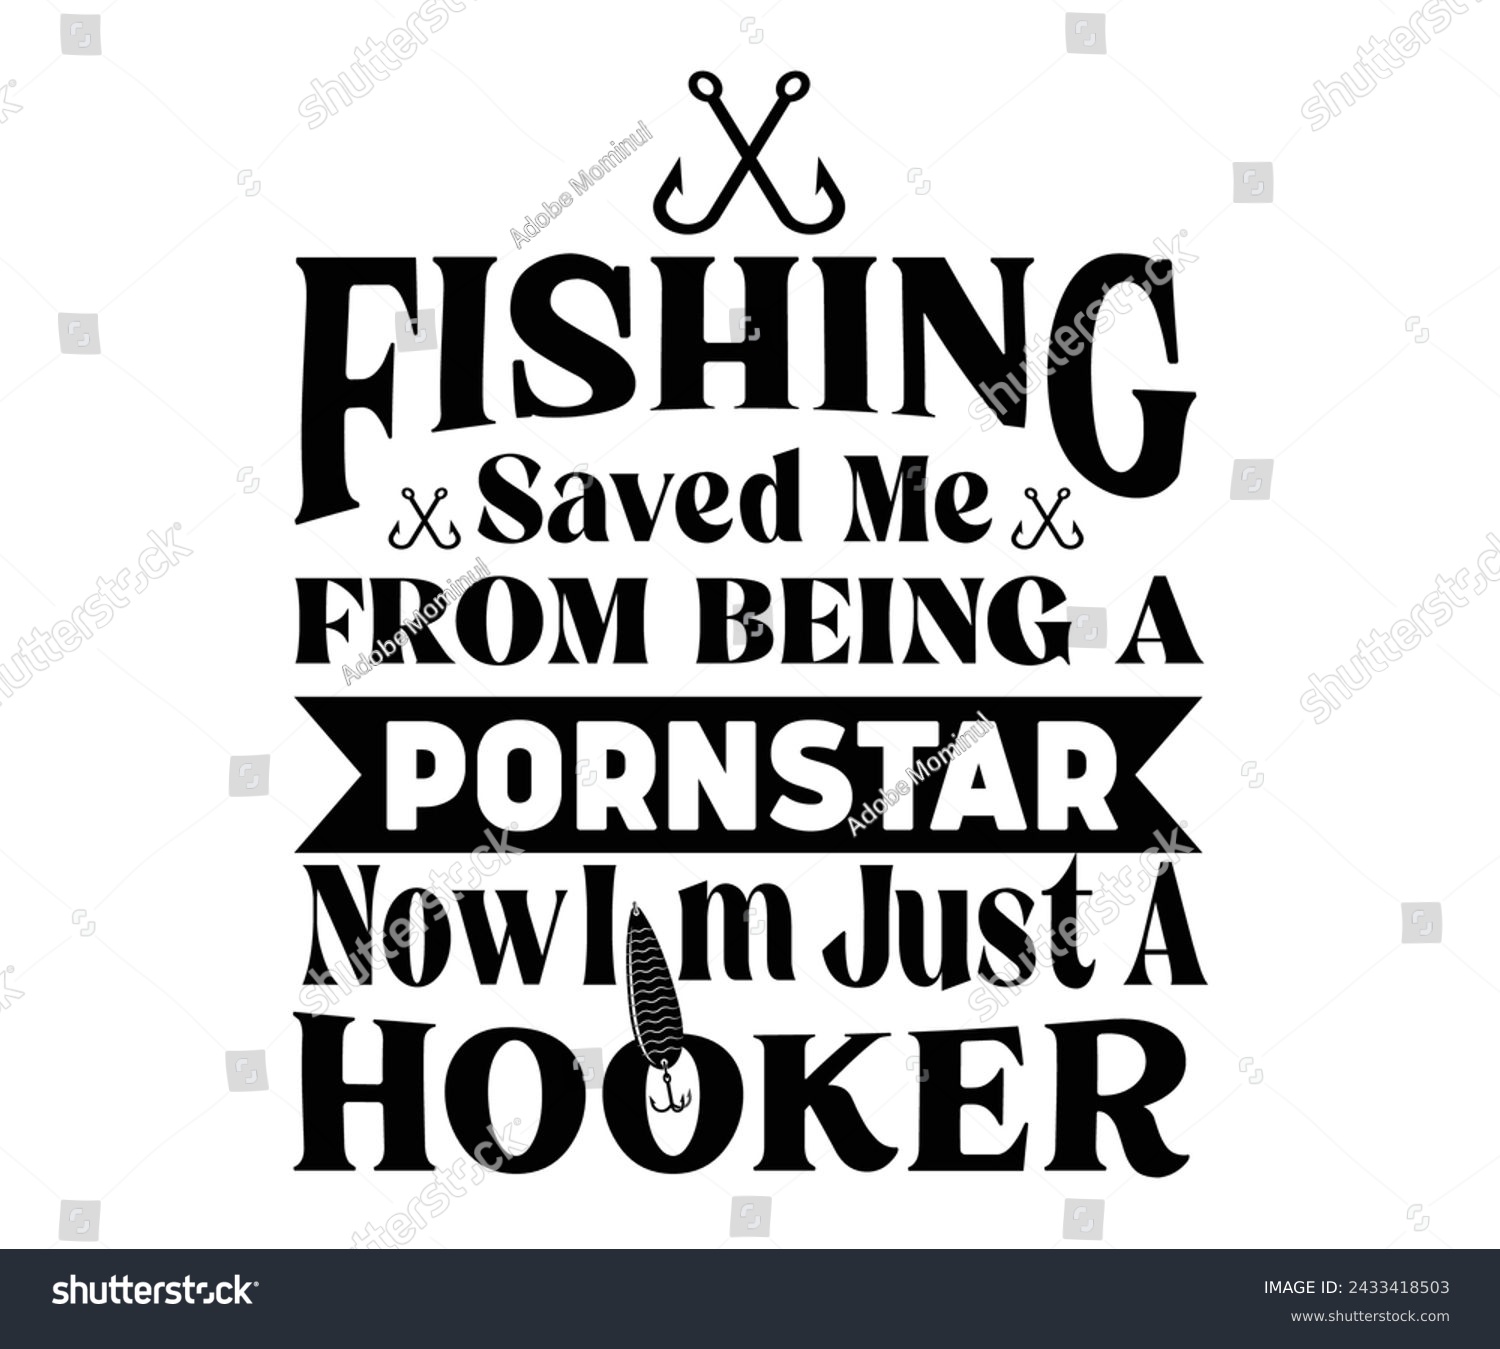 SVG of Fishing Saved Me from Being Pornstar Now I'm Just A Hooker,Fishing Svg,Fishing Quote Svg,Fisherman Svg,Fishing Rod,Dad Svg,Fishing Dad,Father's Day,Lucky Fishing Shirt,Cut File,Commercial Use svg